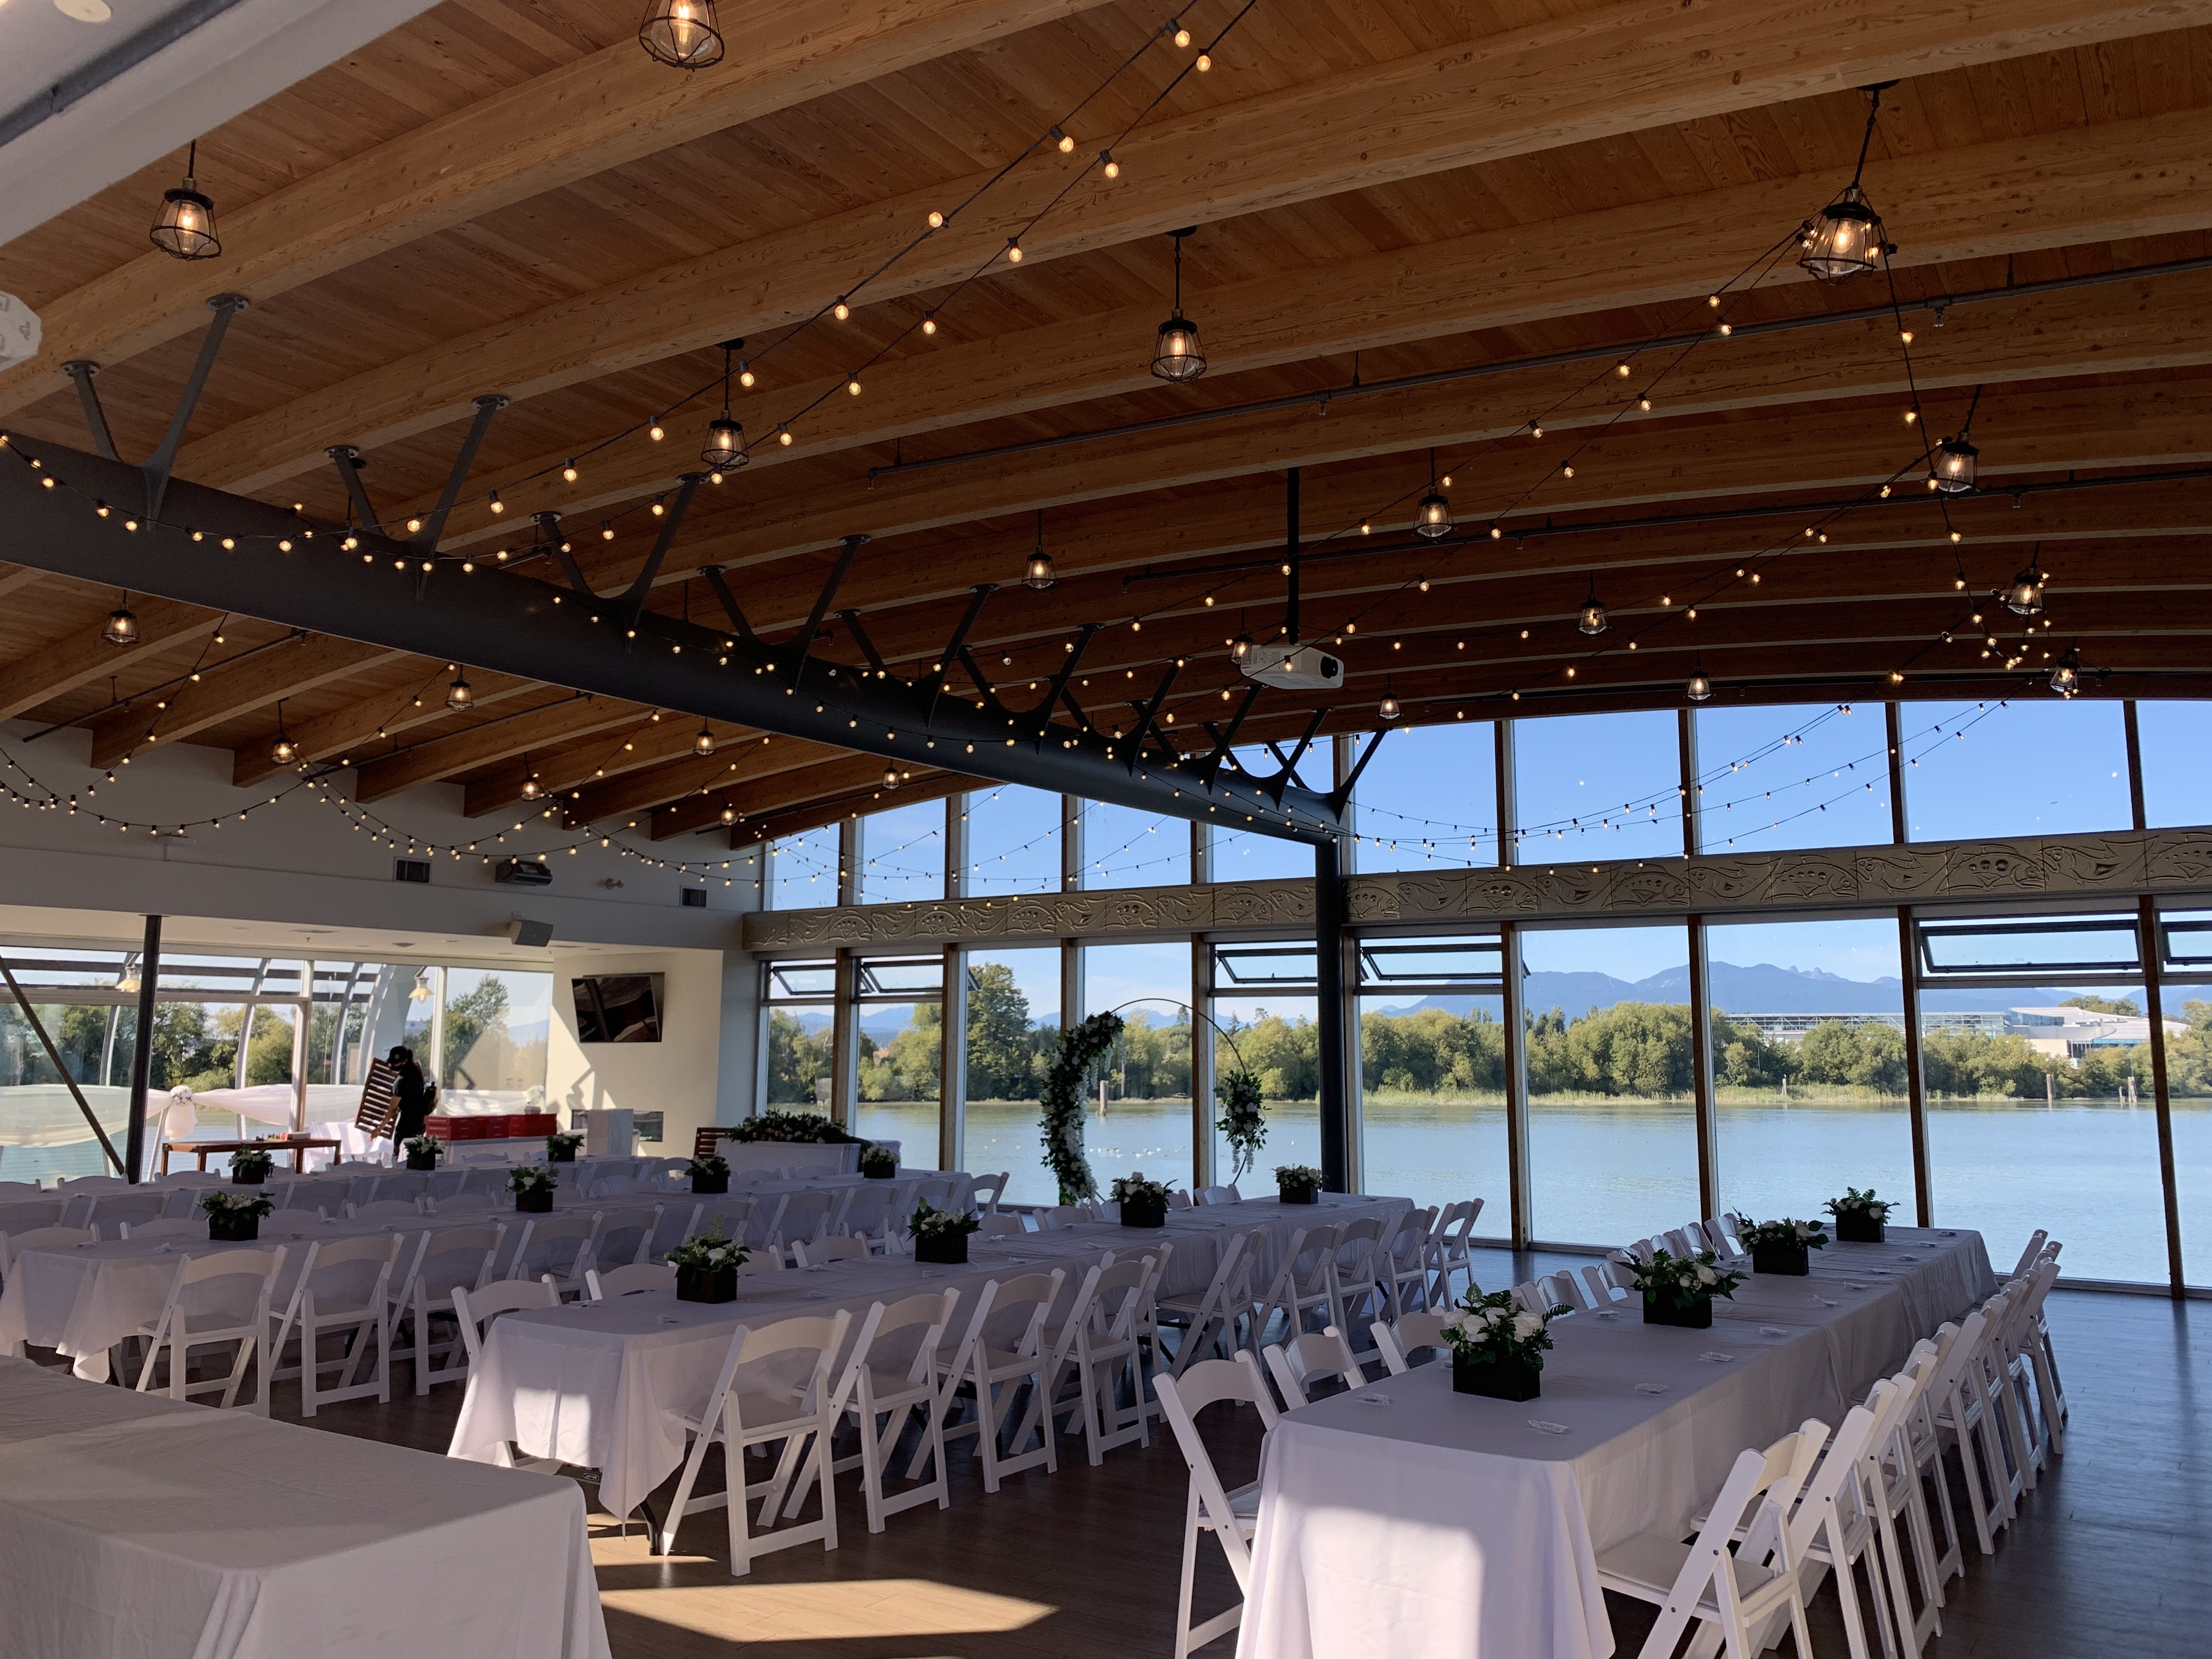 Wedding reception tables and charirs with decorations set up in building overlooking the water.